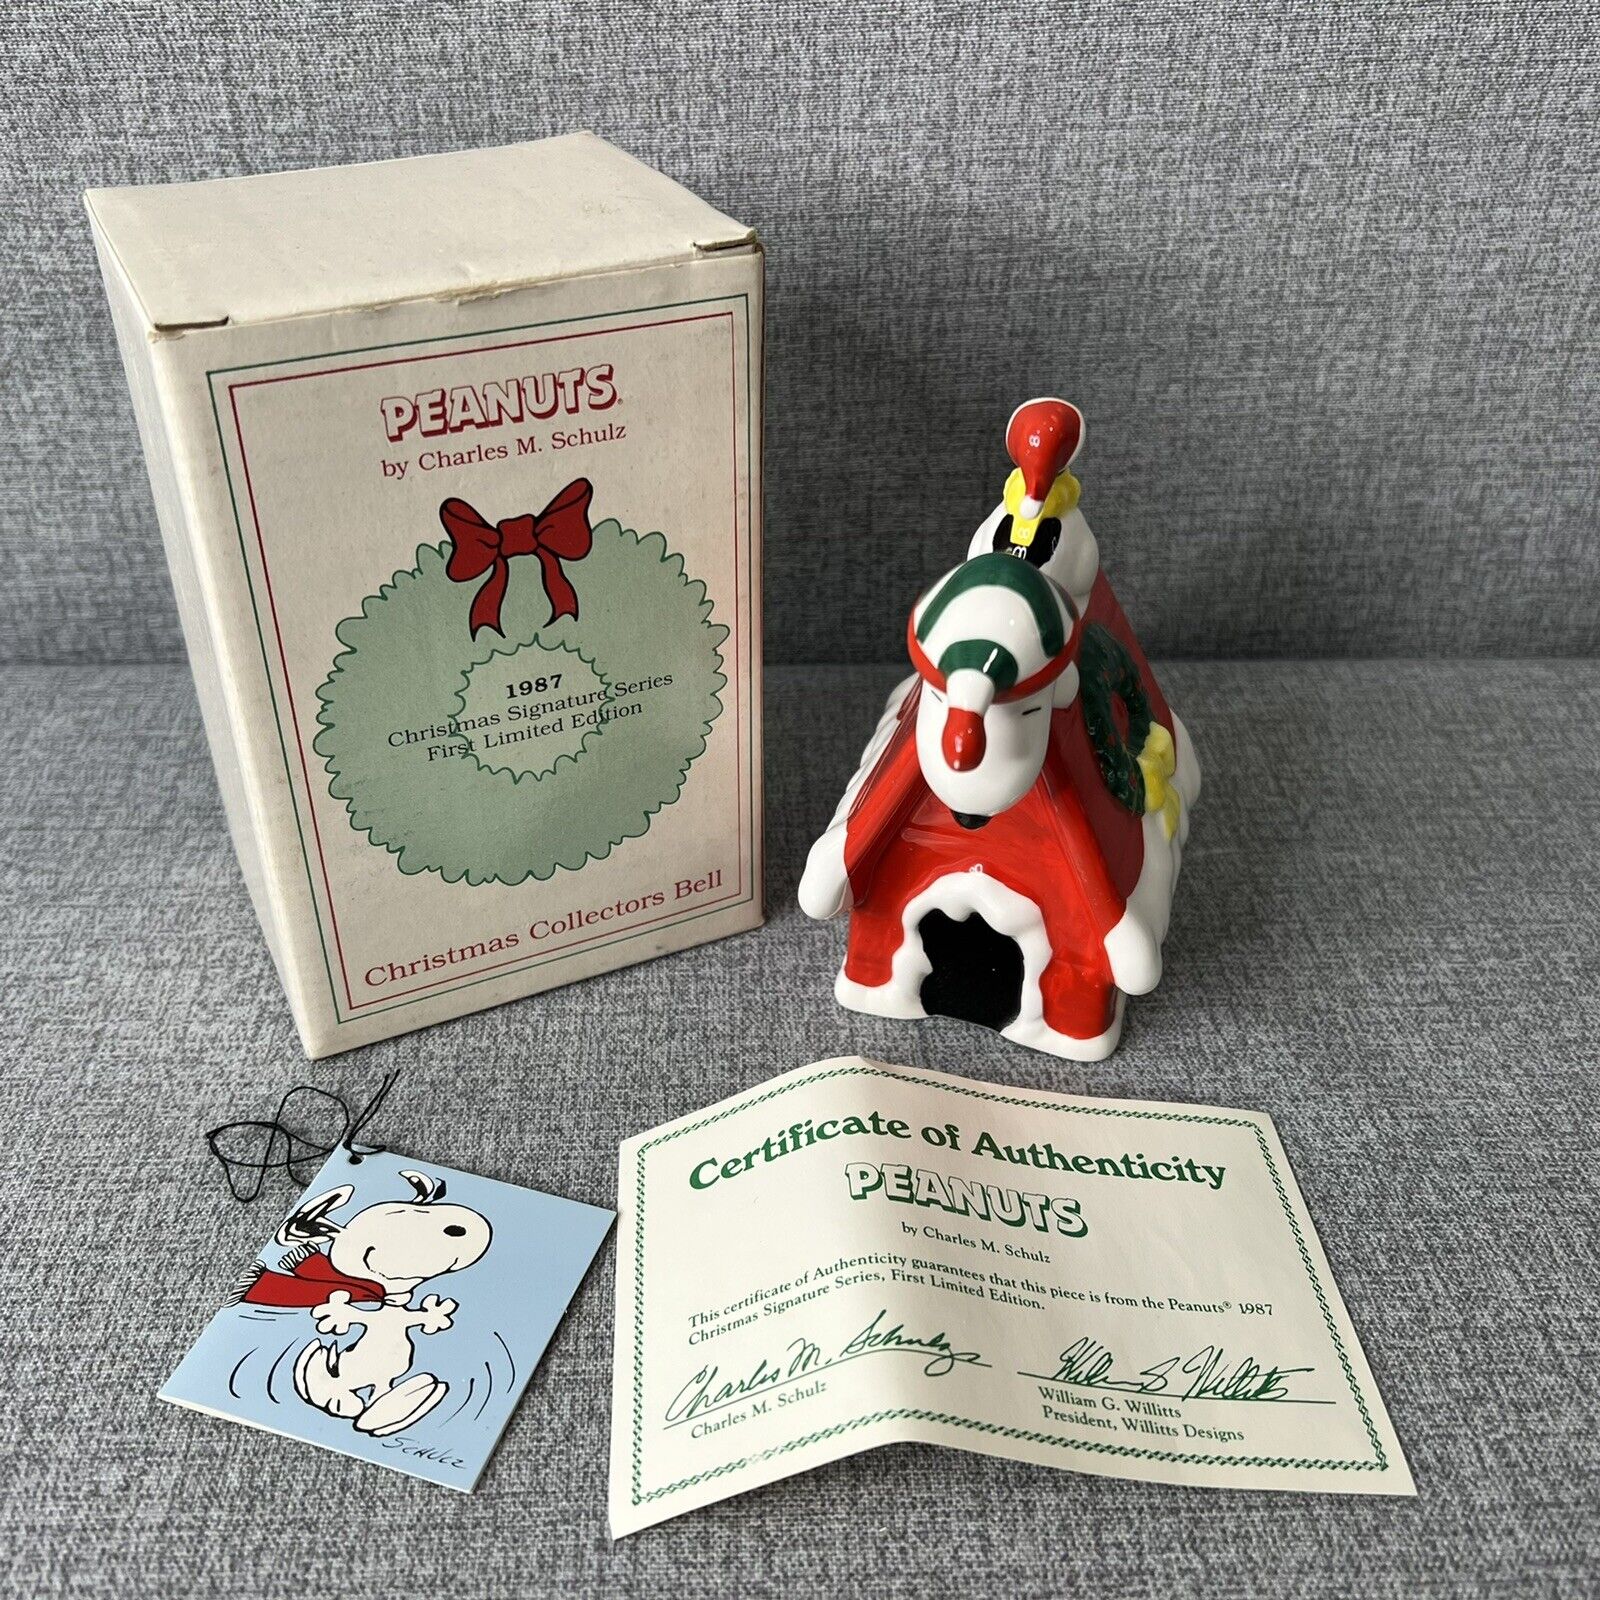 Peanuts Christmas Bell 1987 Snoopy Woodstock First Limited Edition